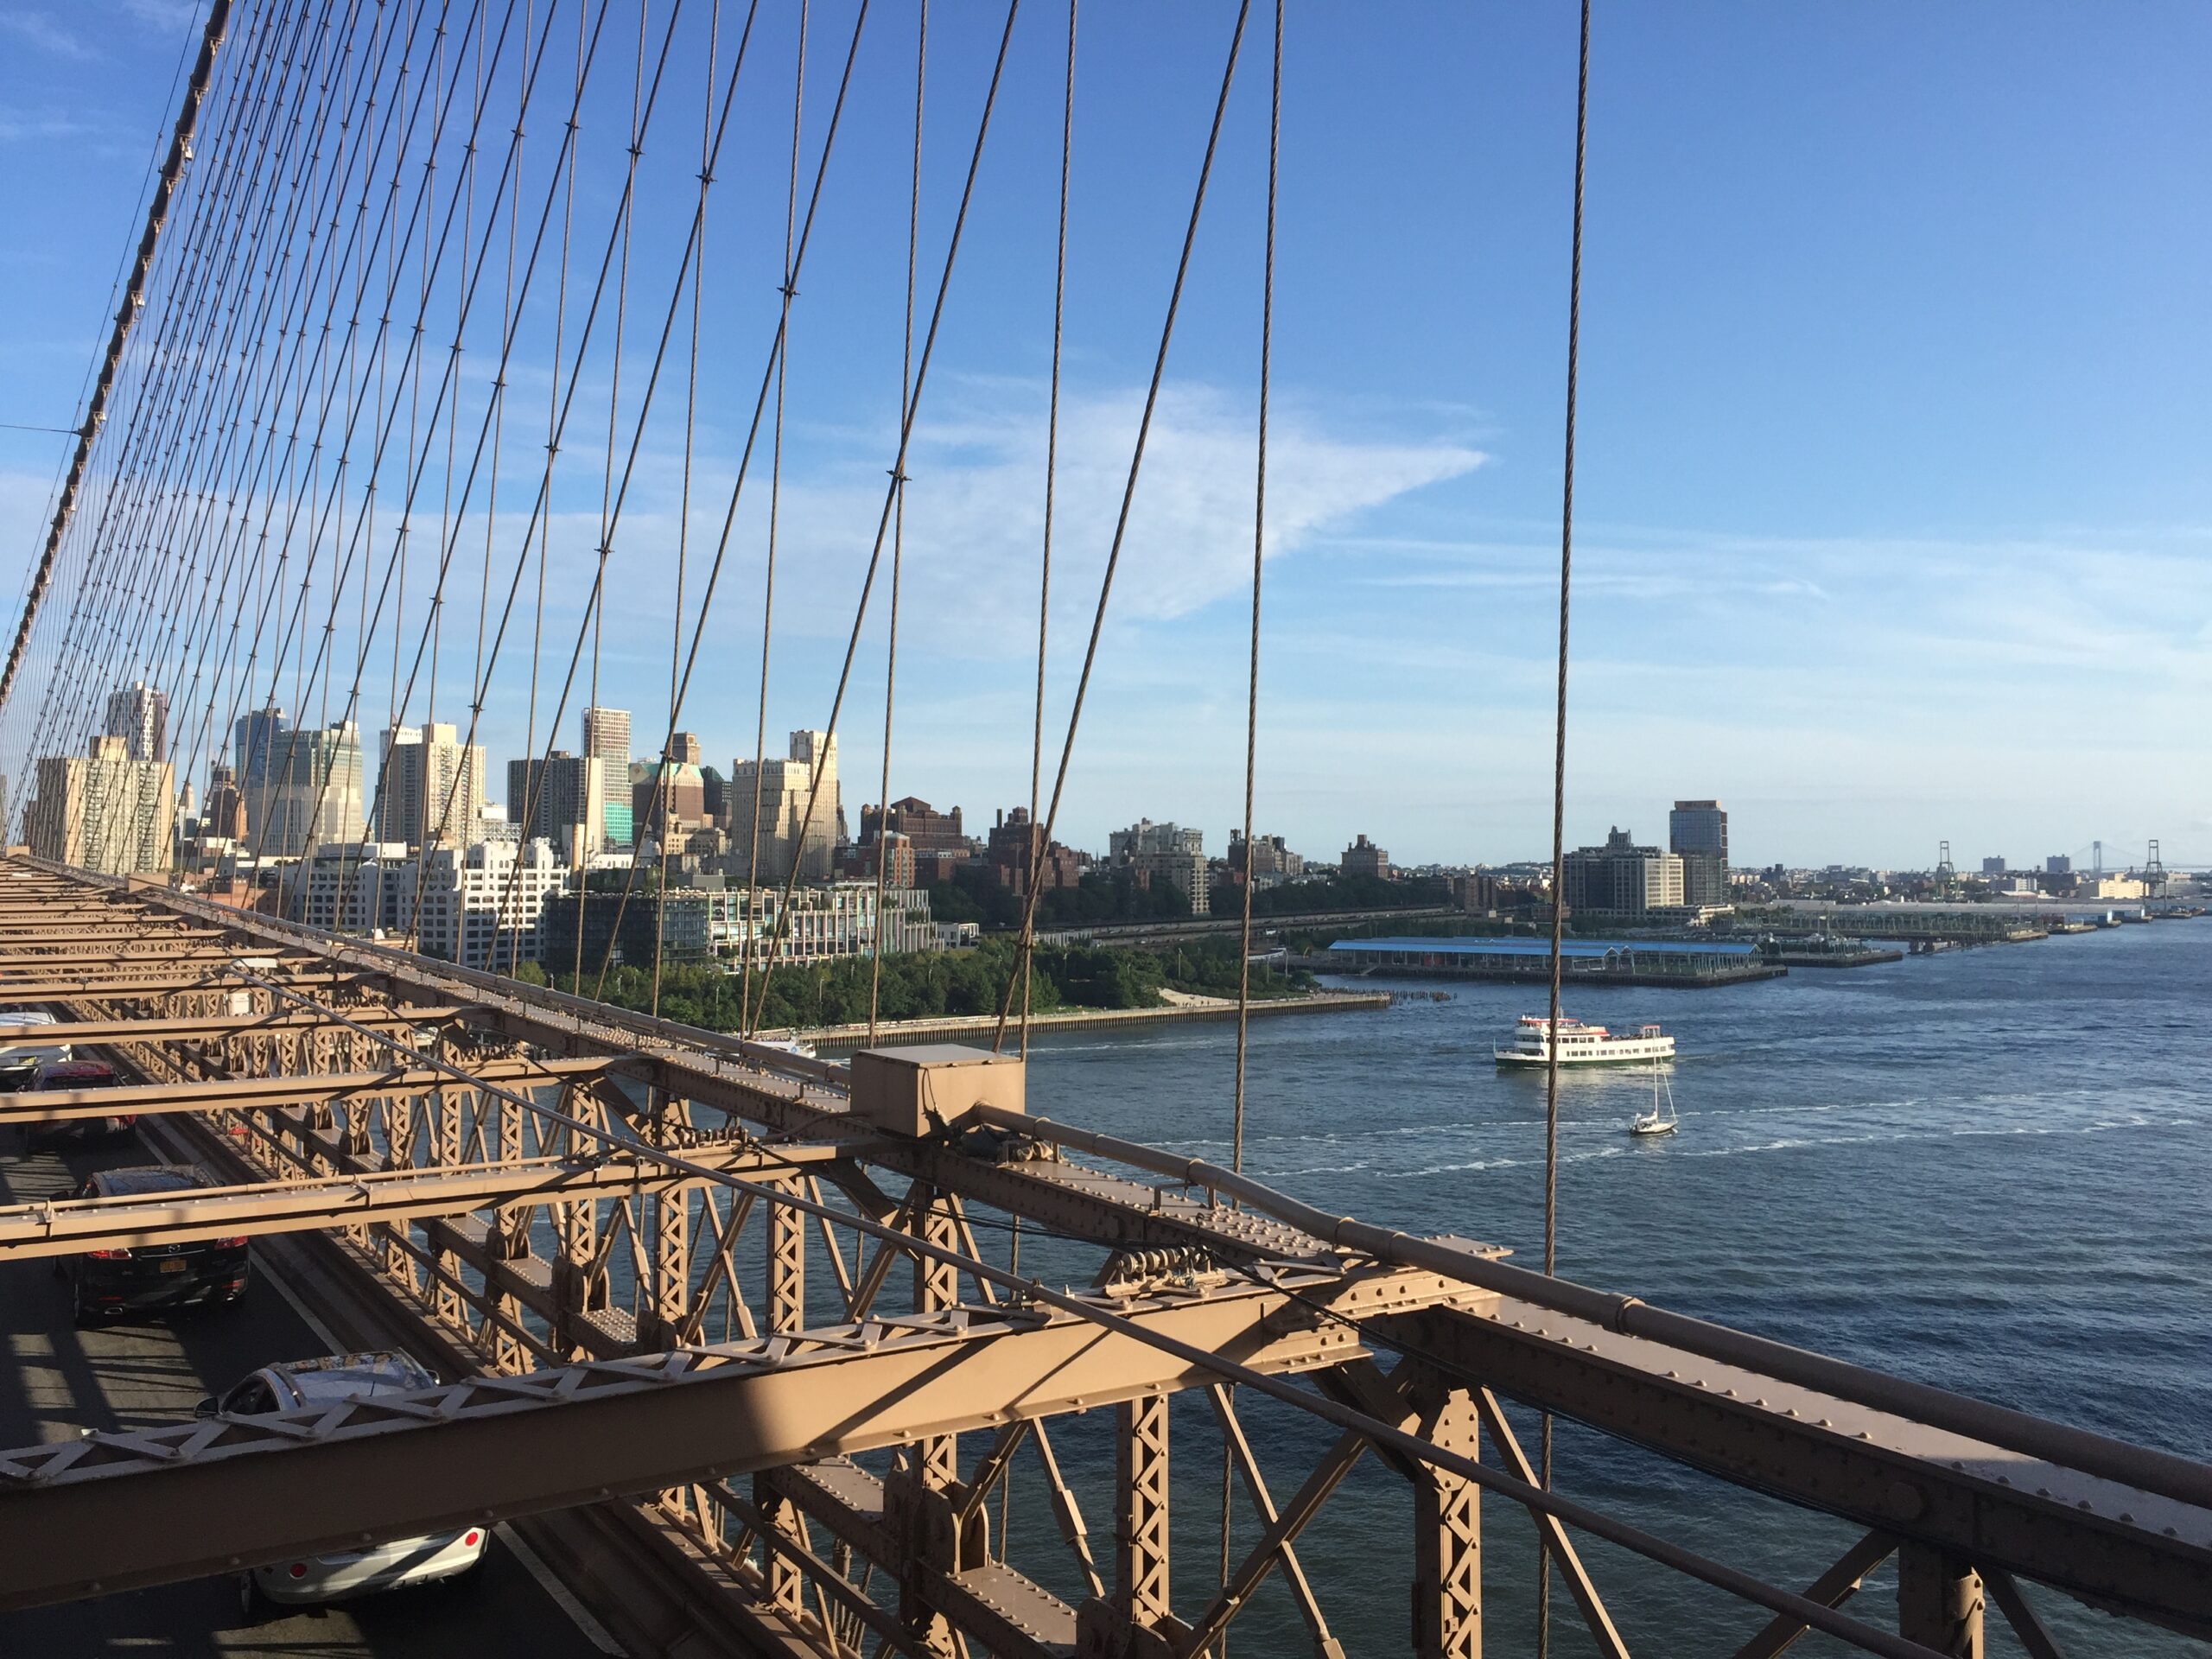 A pedestrian’s view of the East River from the Brooklyn Bridge.